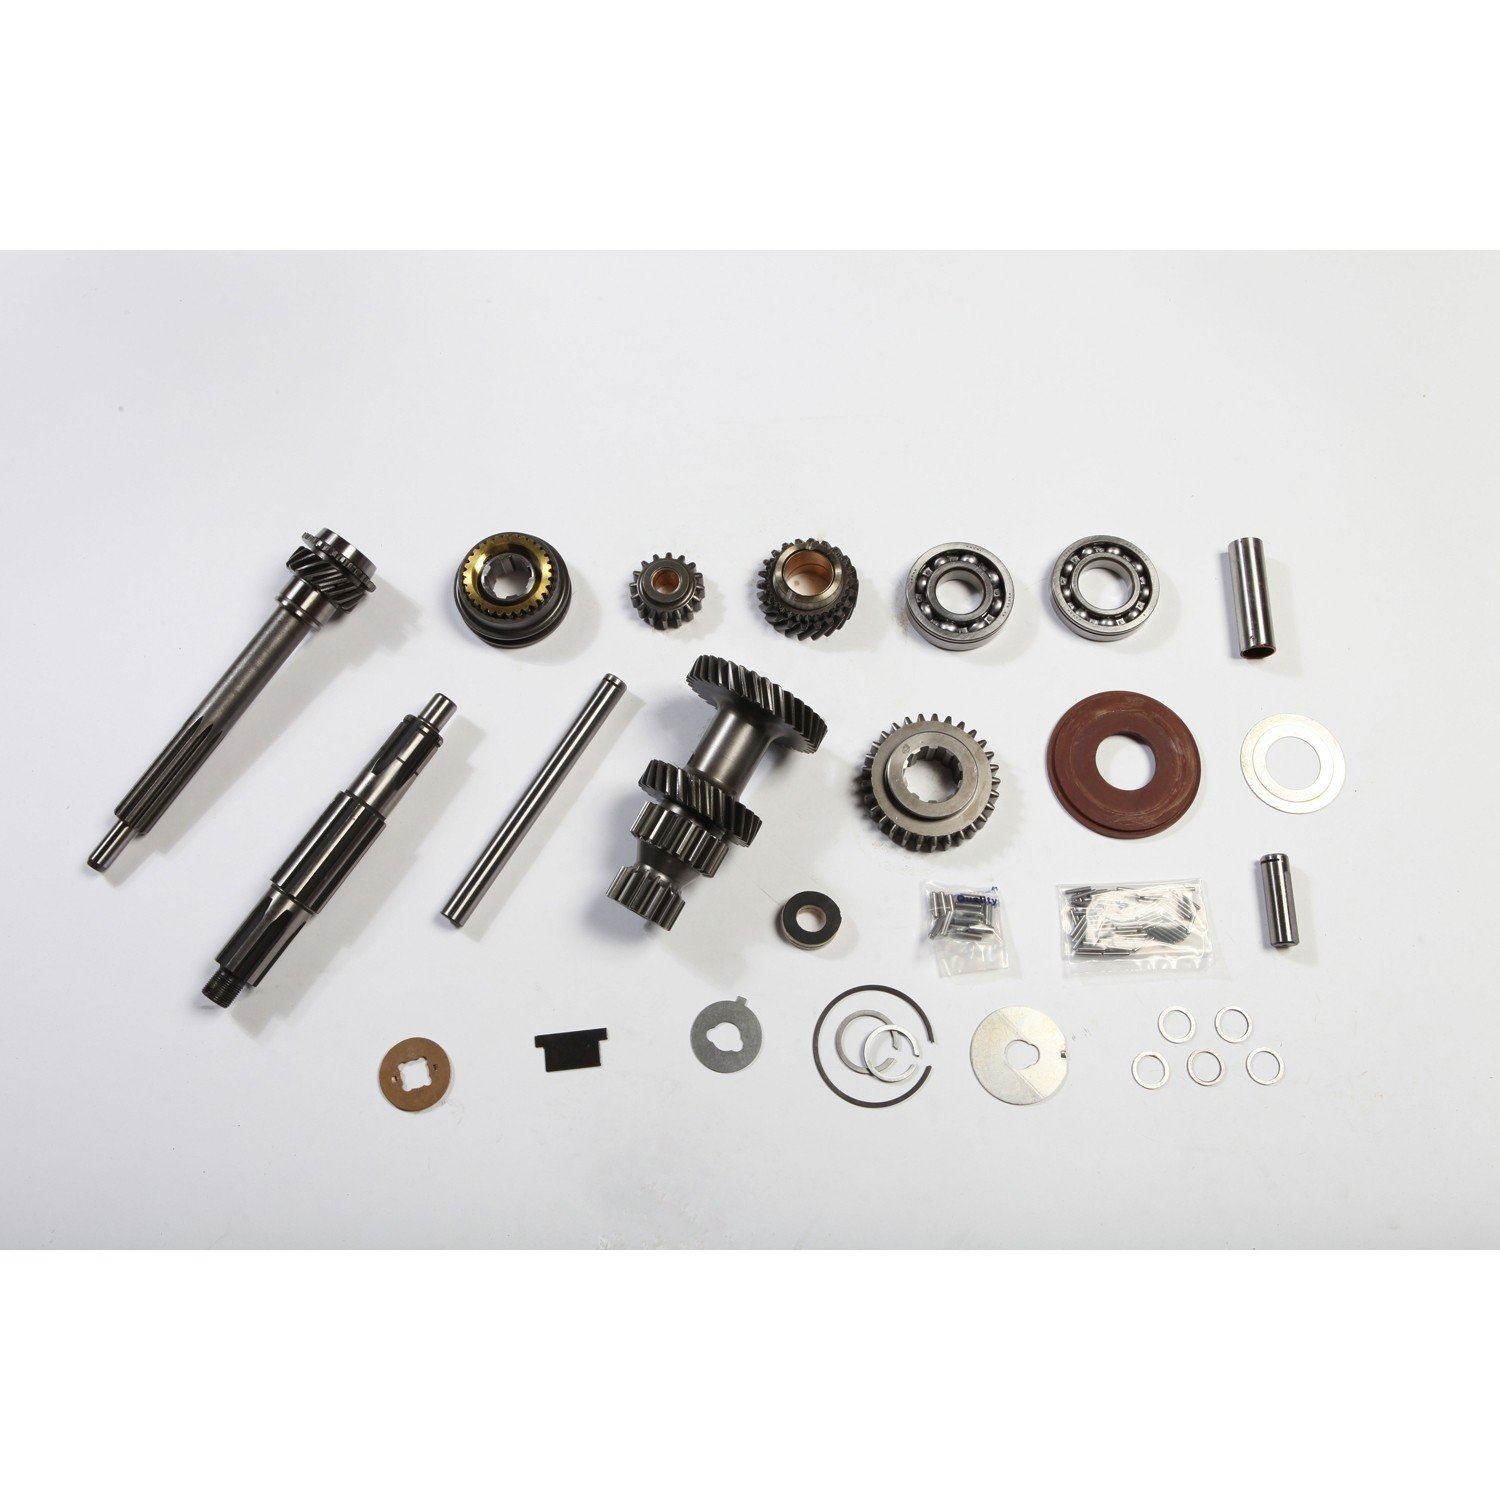 OMIX OMIX 18802.02 T-90 Internal Parts Kit for 54-64 Vehicles